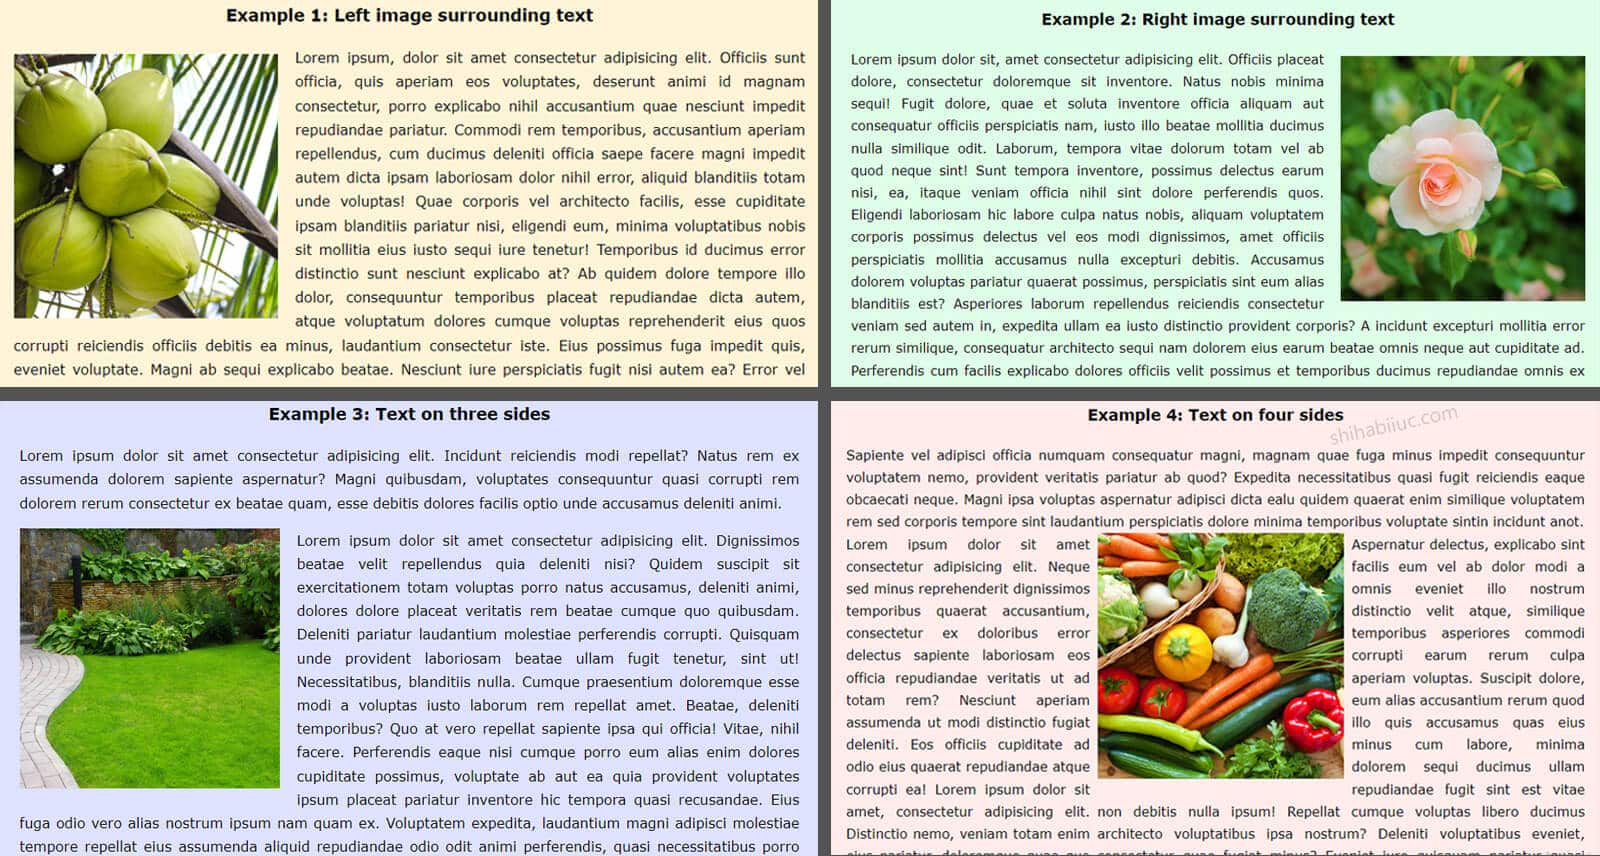 Various examples of text wrapping over images